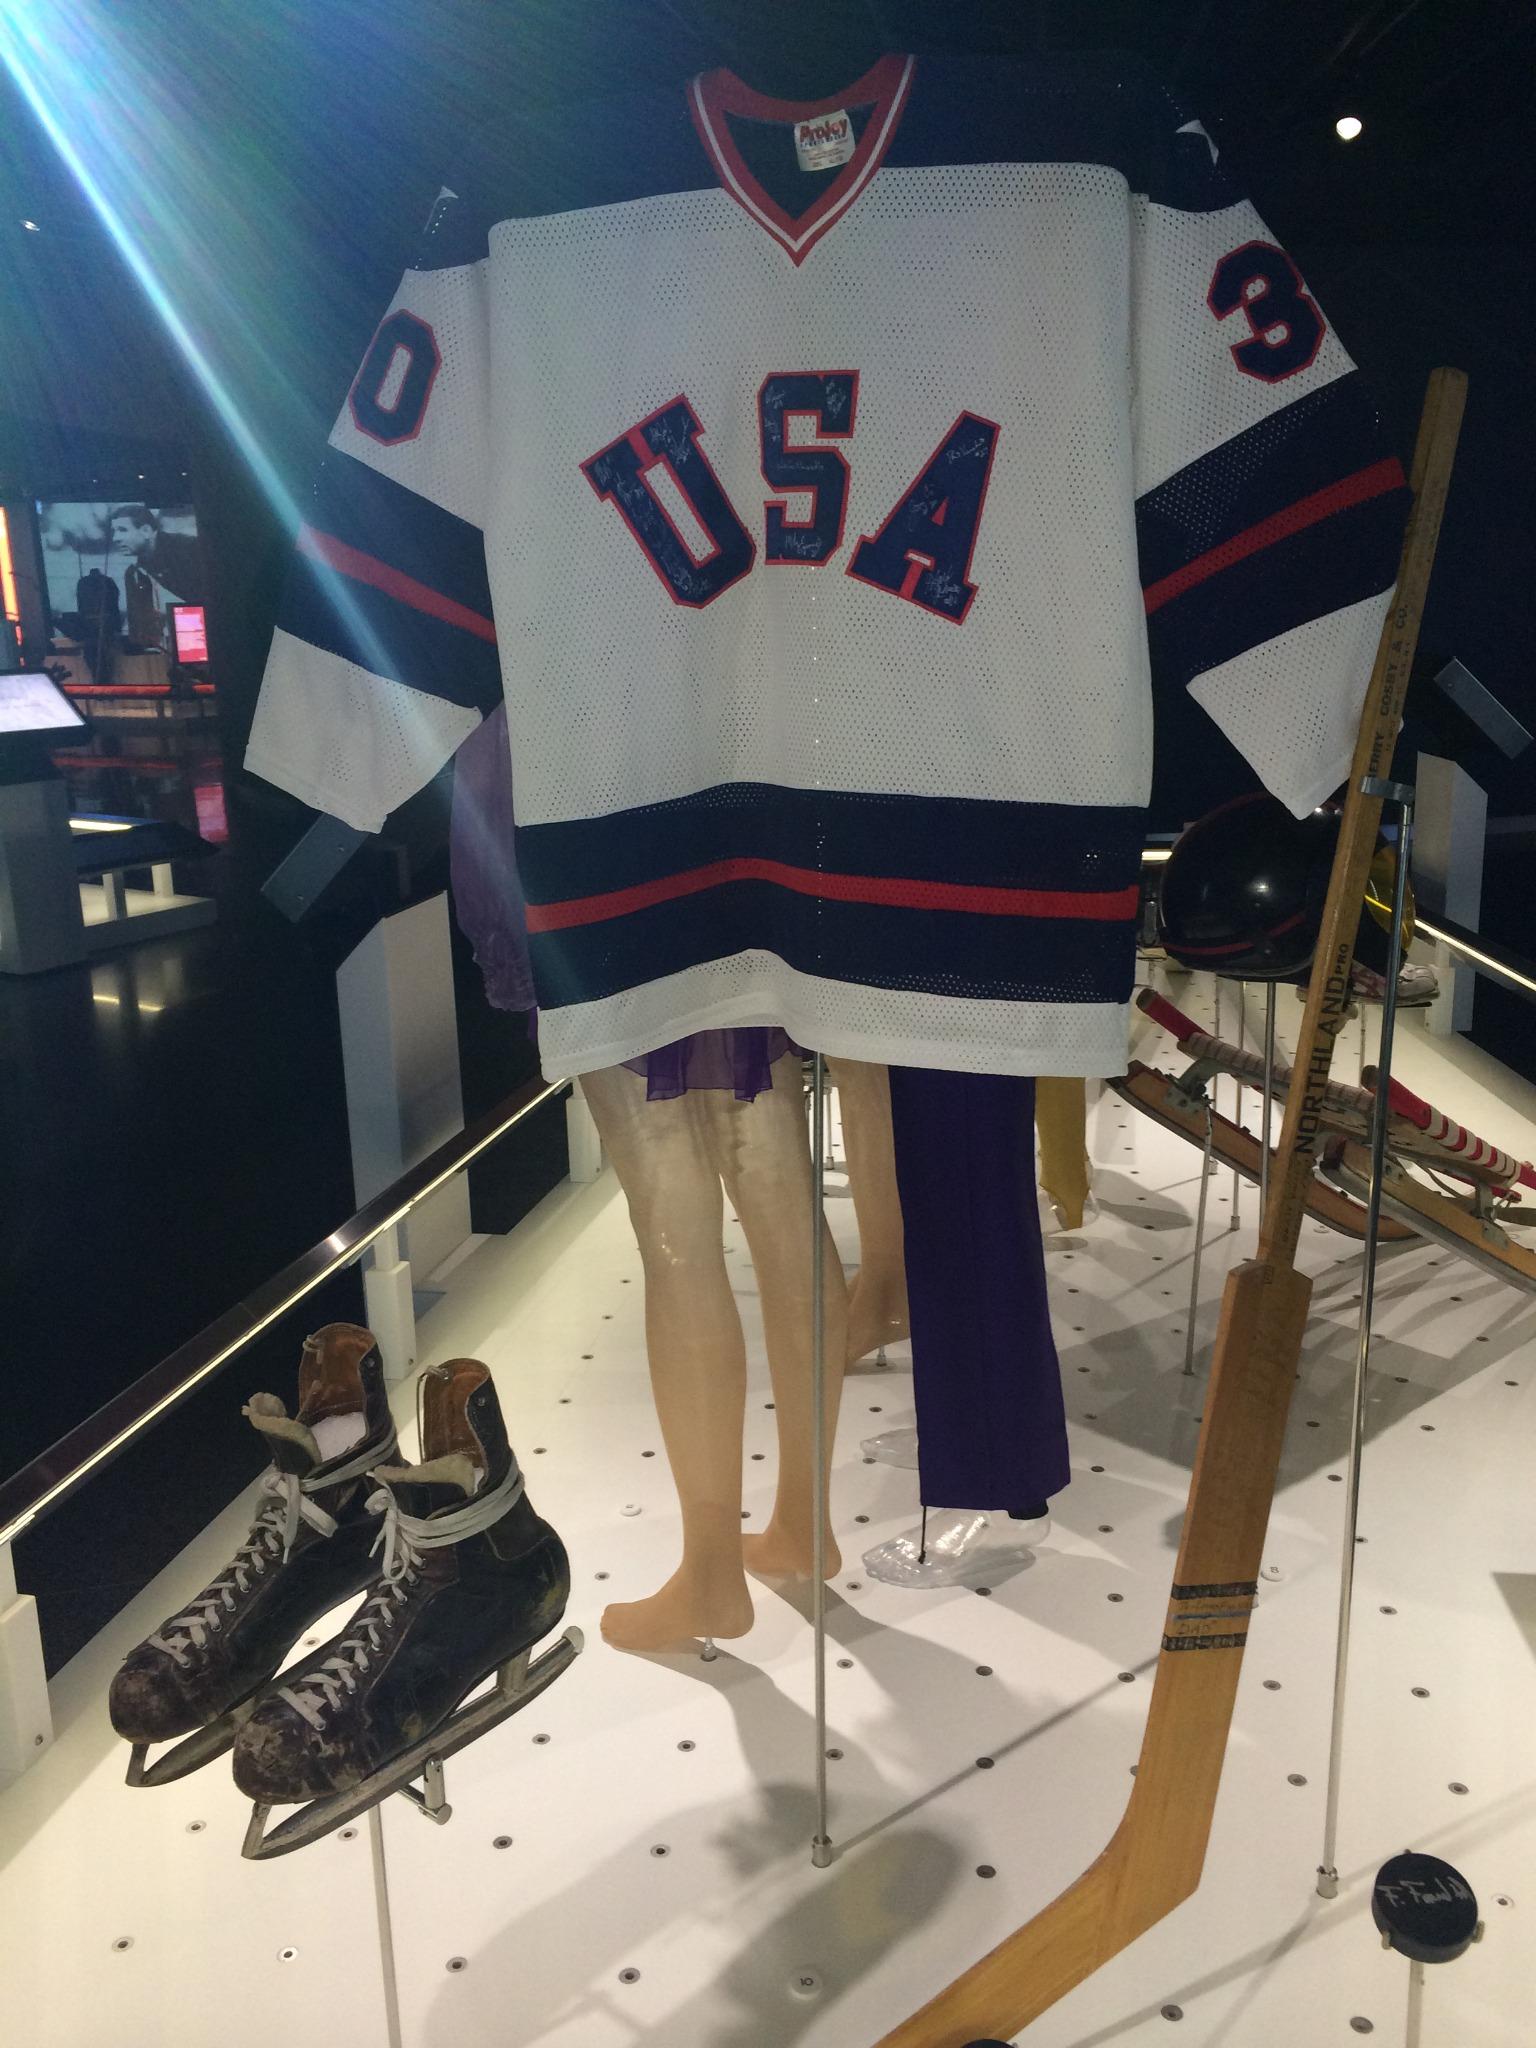 Boston 2024 on Twitter "Check out this MiracleonIce jersey seen by